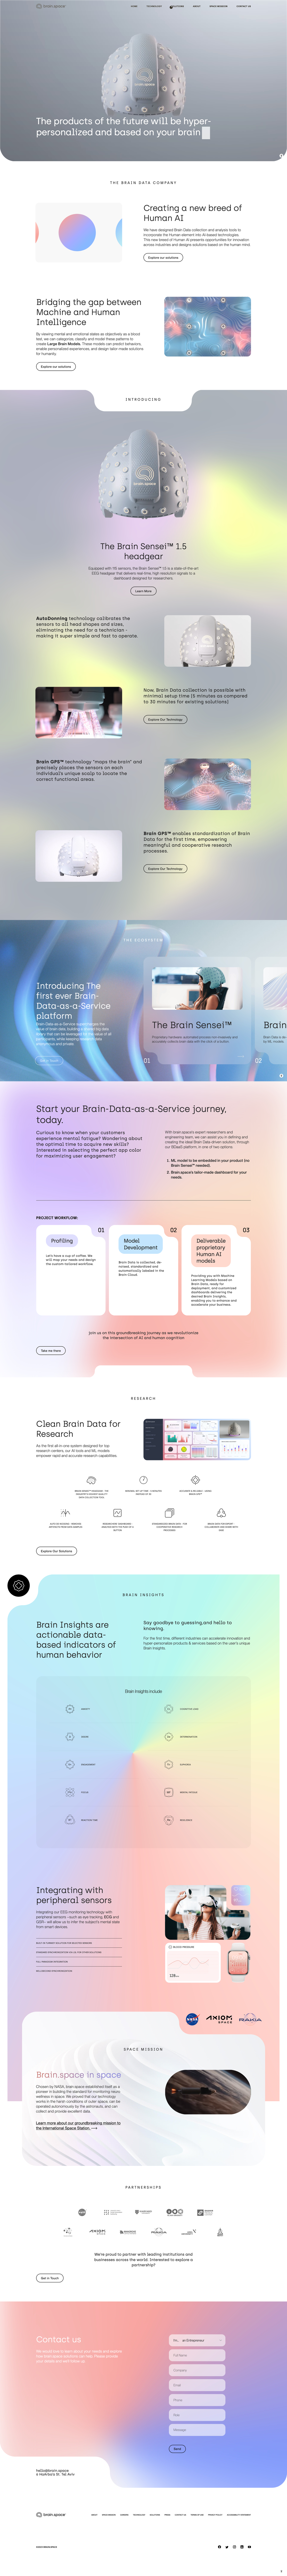 brain.space Landing Page Example: The brain data company. We believe that designing a future of Human AI will revolutionize the way we interact with technology.